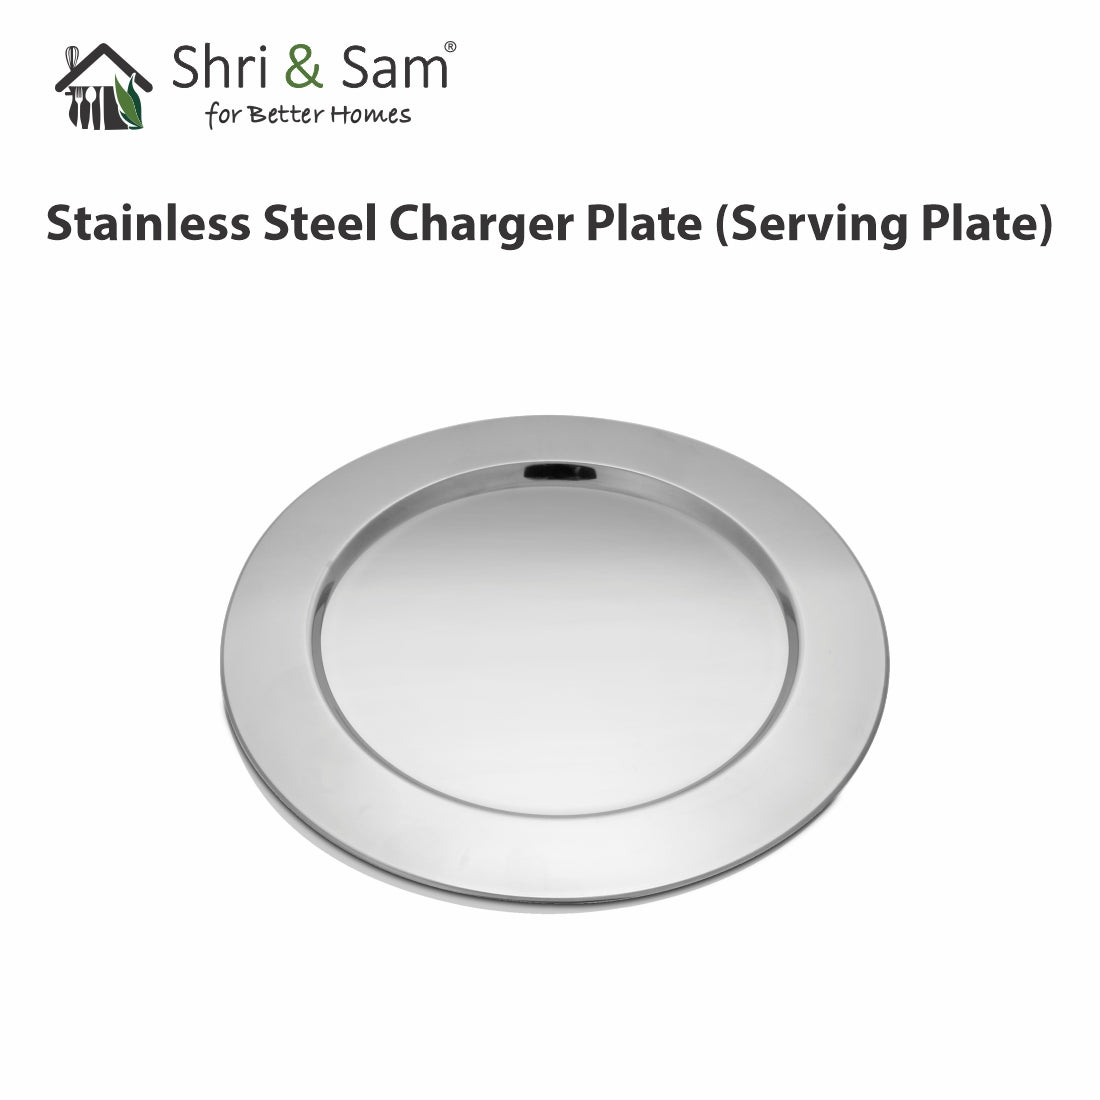 Stainless Steel Charger Plate (Serving Plate)